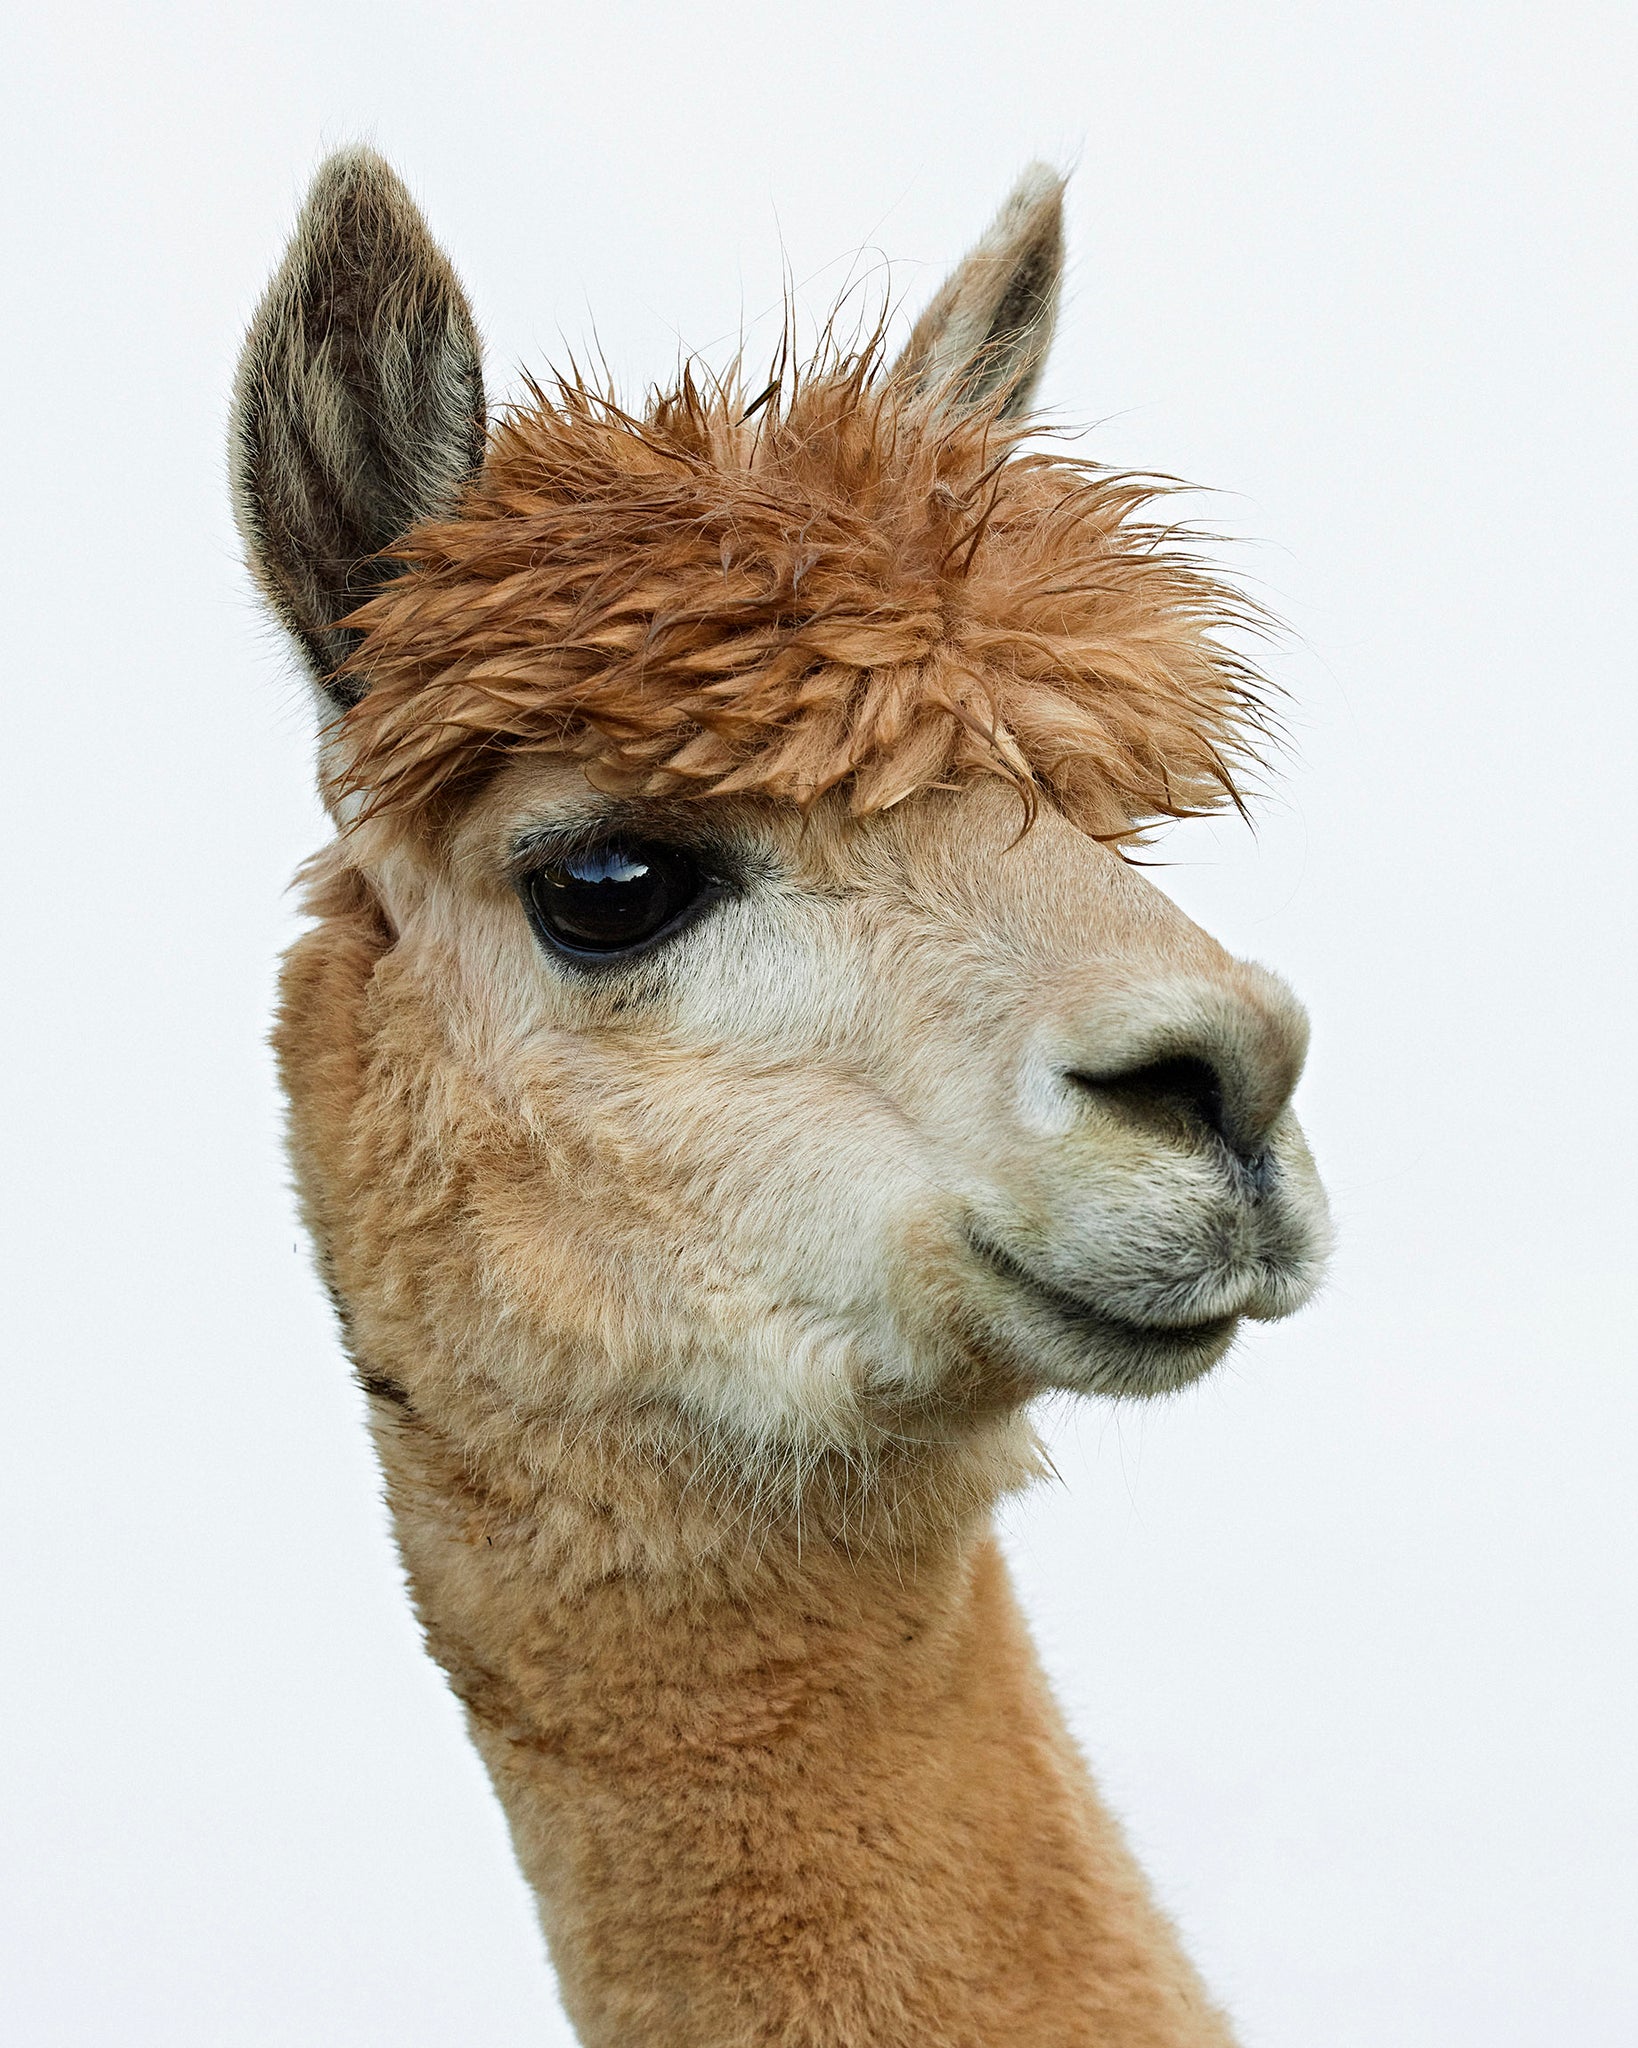 Common mistakes alpaca-owners make